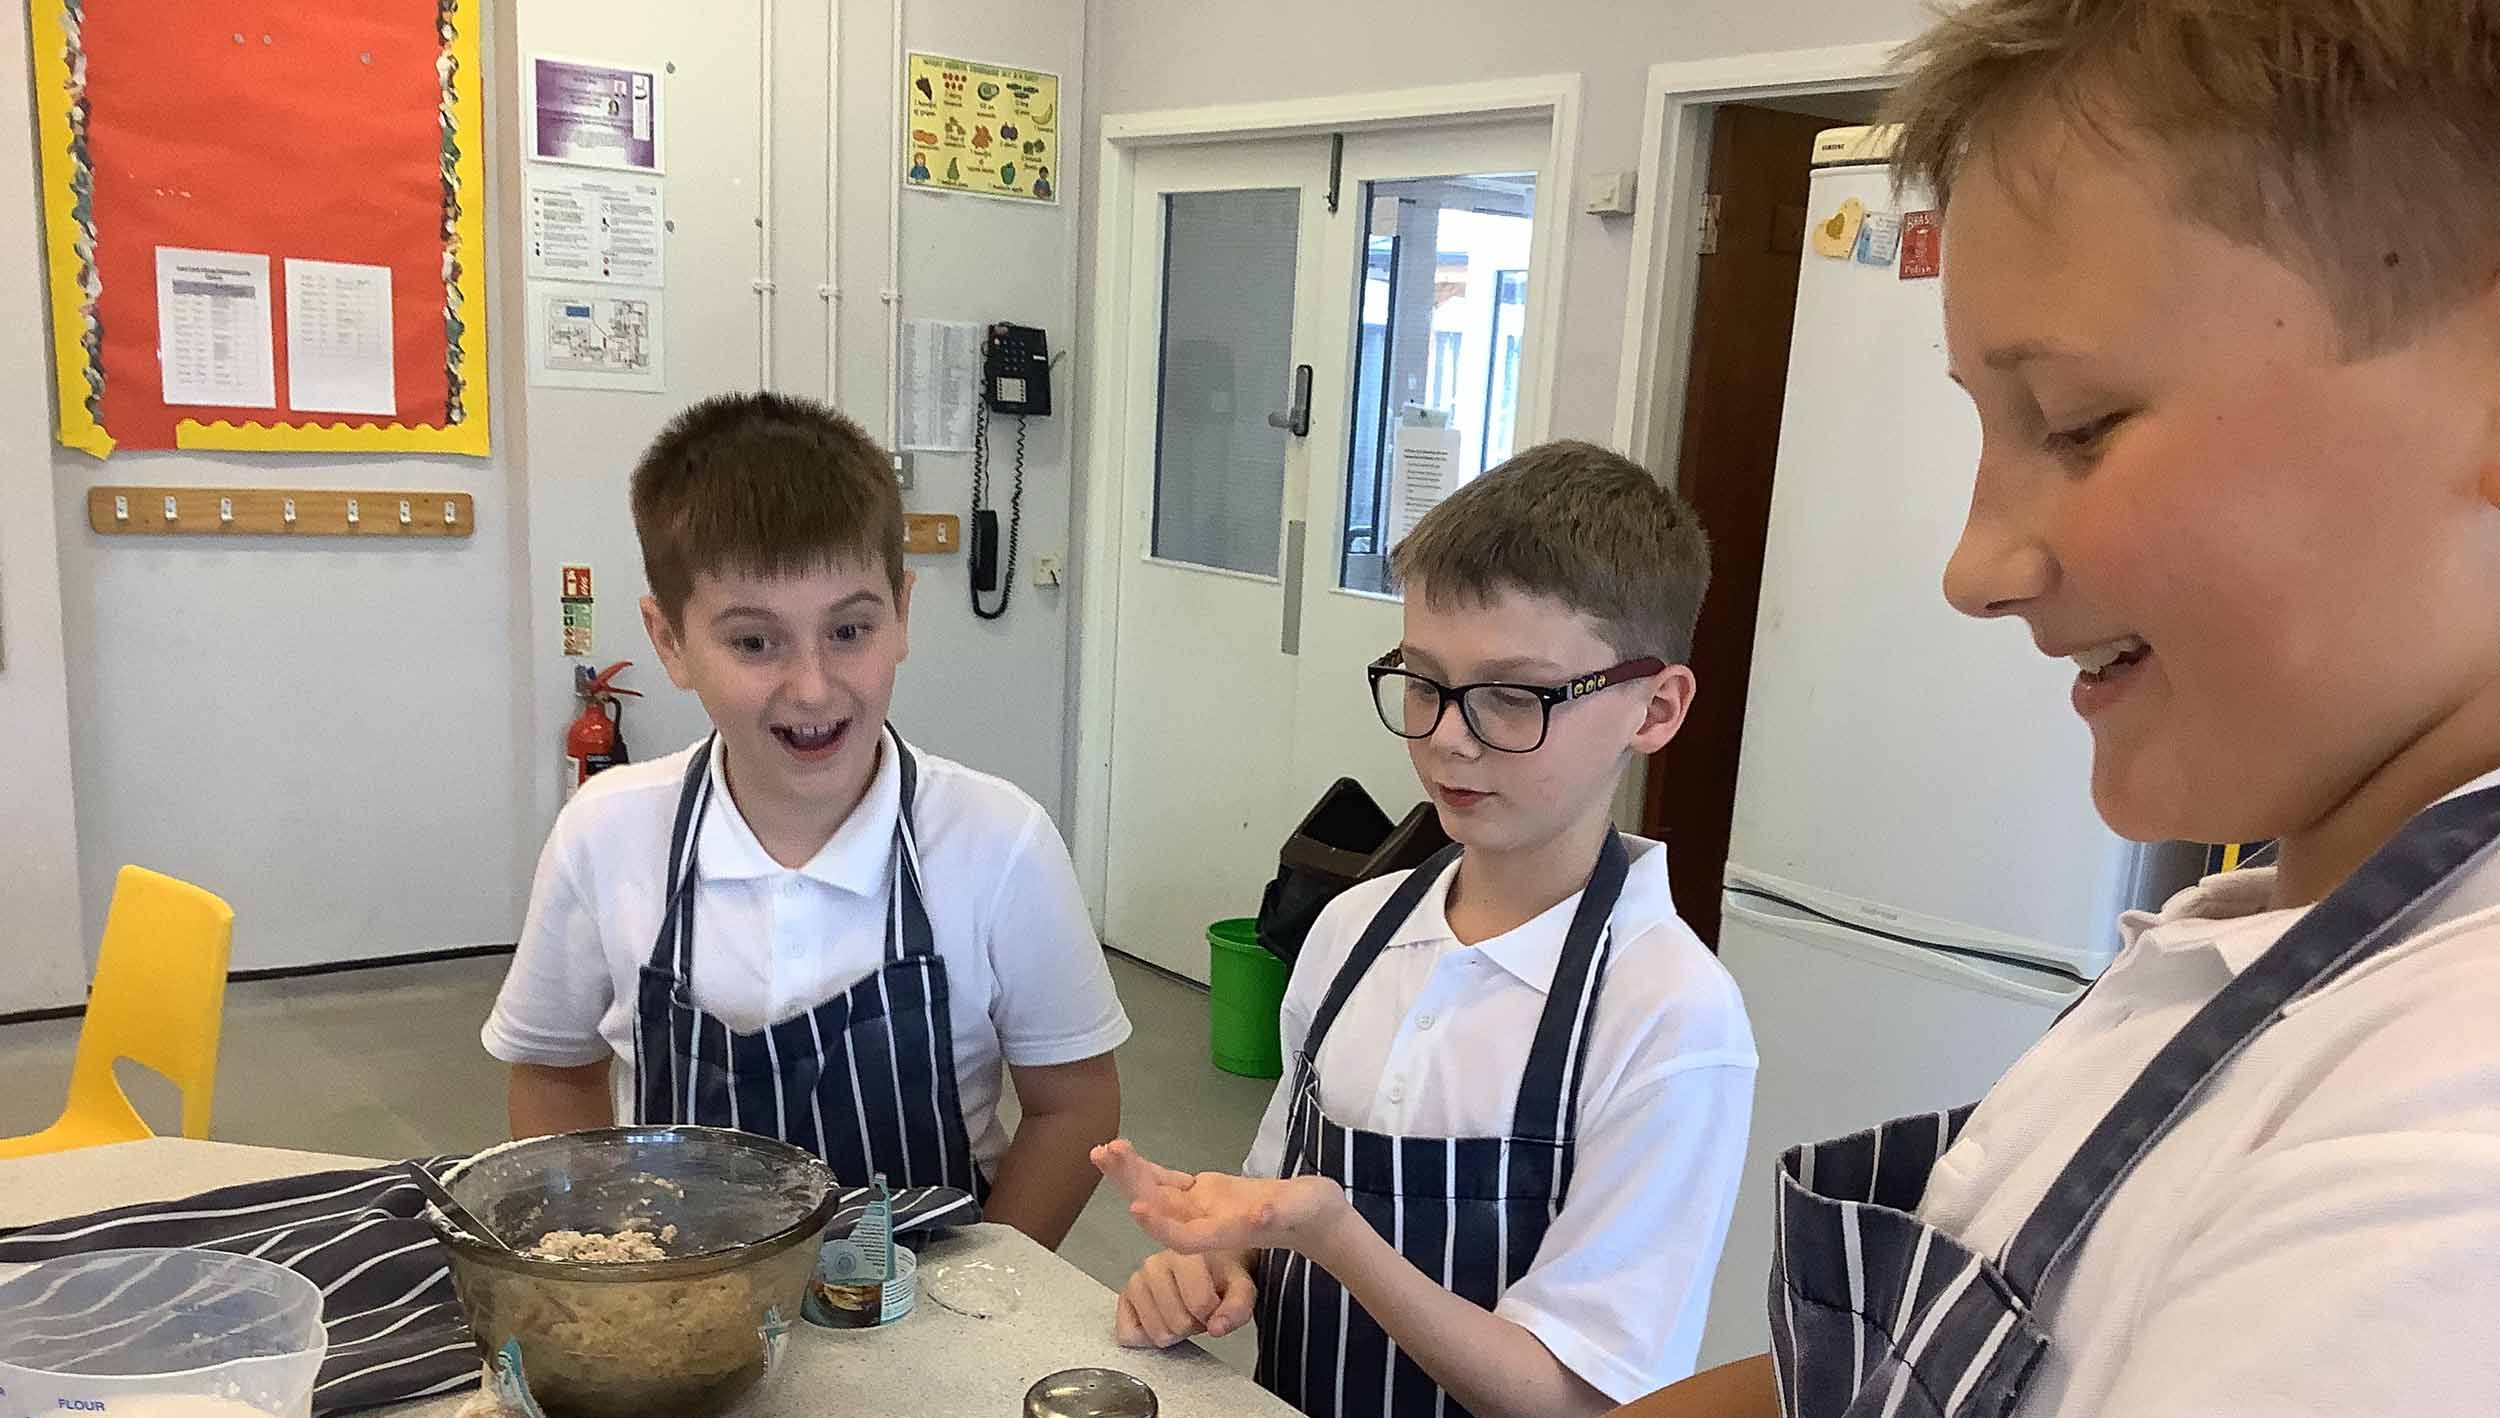 Pupils Cooking